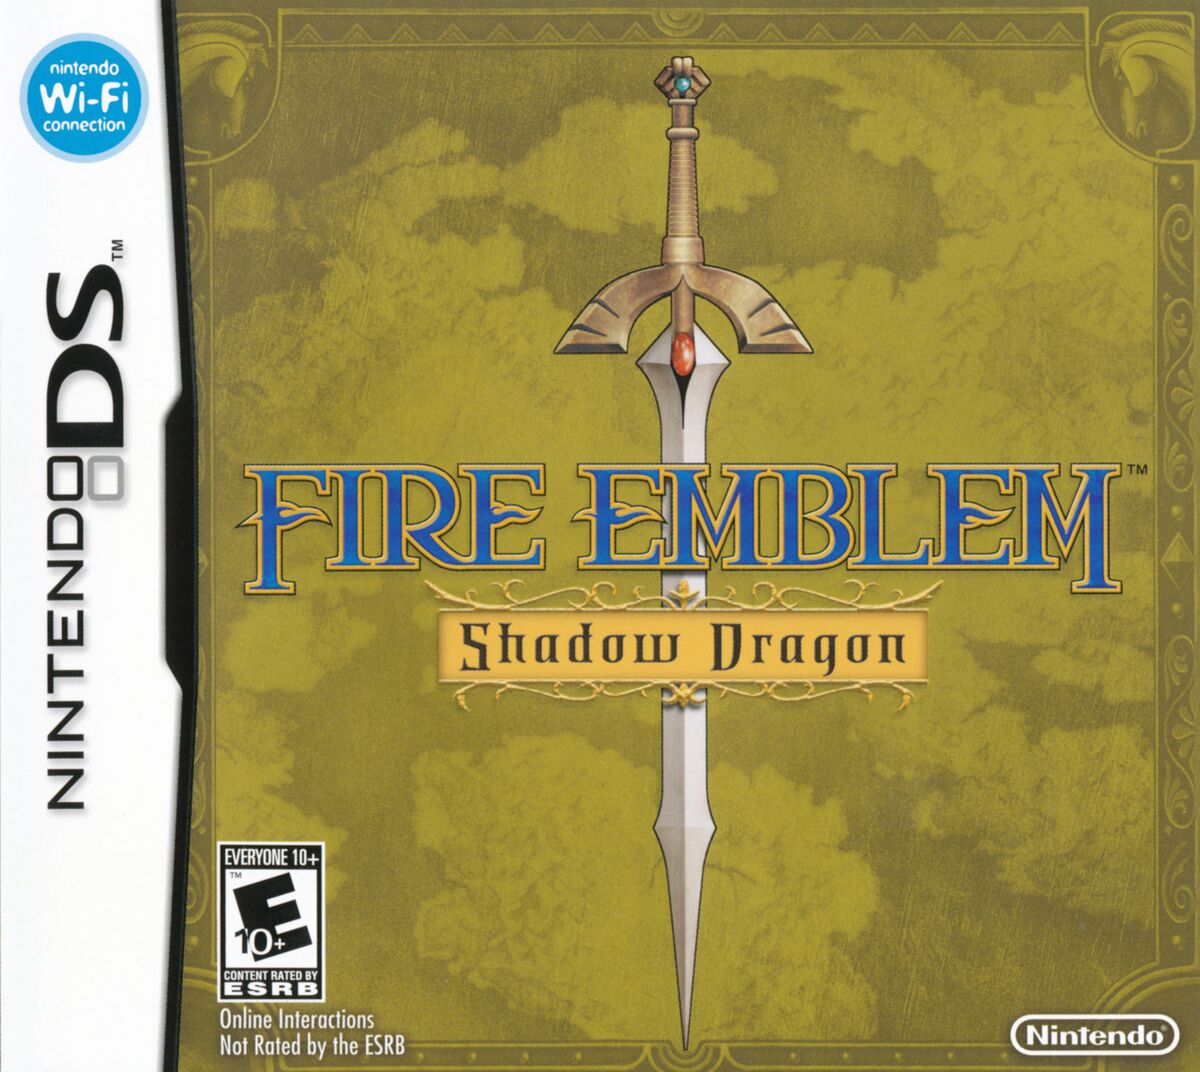 fire-emblem-shadow-dragon-strategywiki-the-video-game-walkthrough-and-strategy-guide-wiki